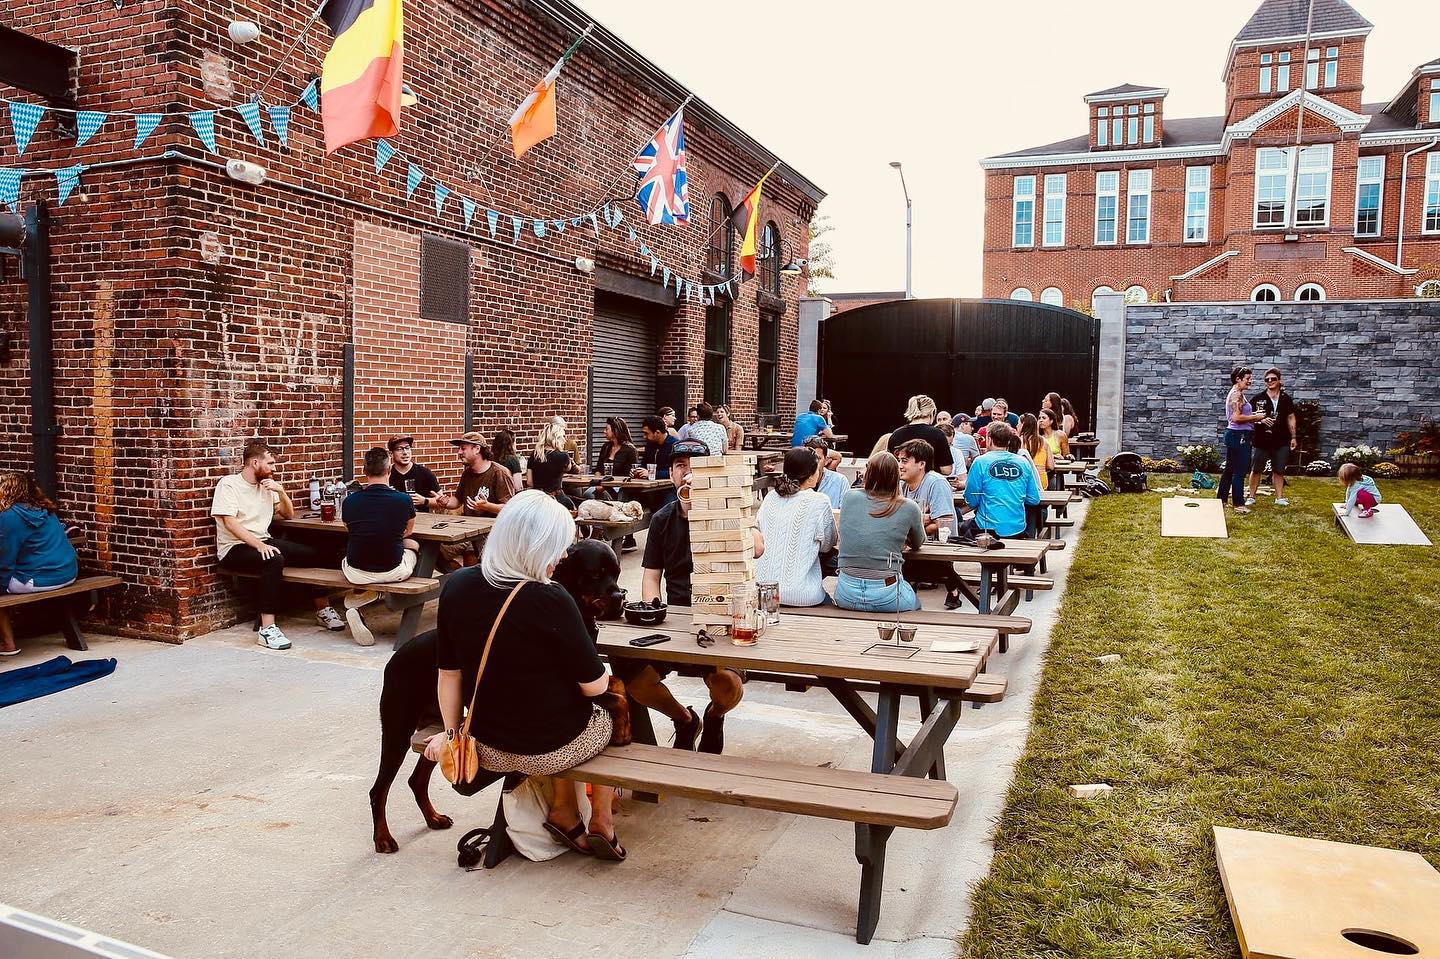 exterior of guilford hall brewery, patio area with people sitting at picnic tables